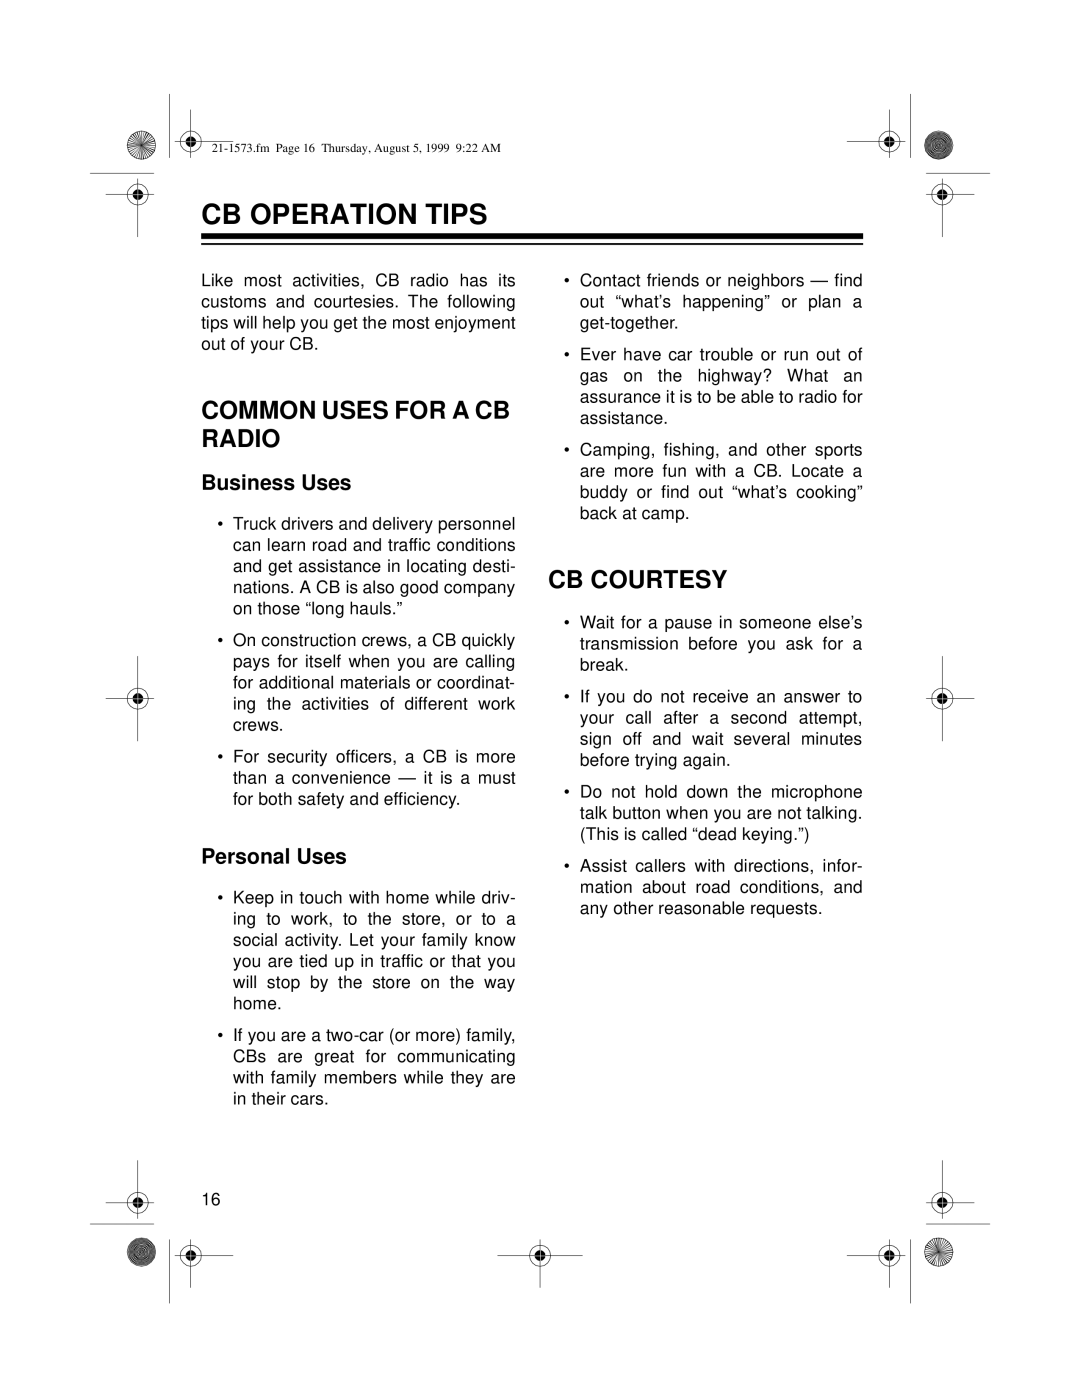 Samsung TRC-445 owner manual Cb Operation Tips, Common Uses For A Cb Radio, Cb Courtesy, Business Uses, Personal Uses 